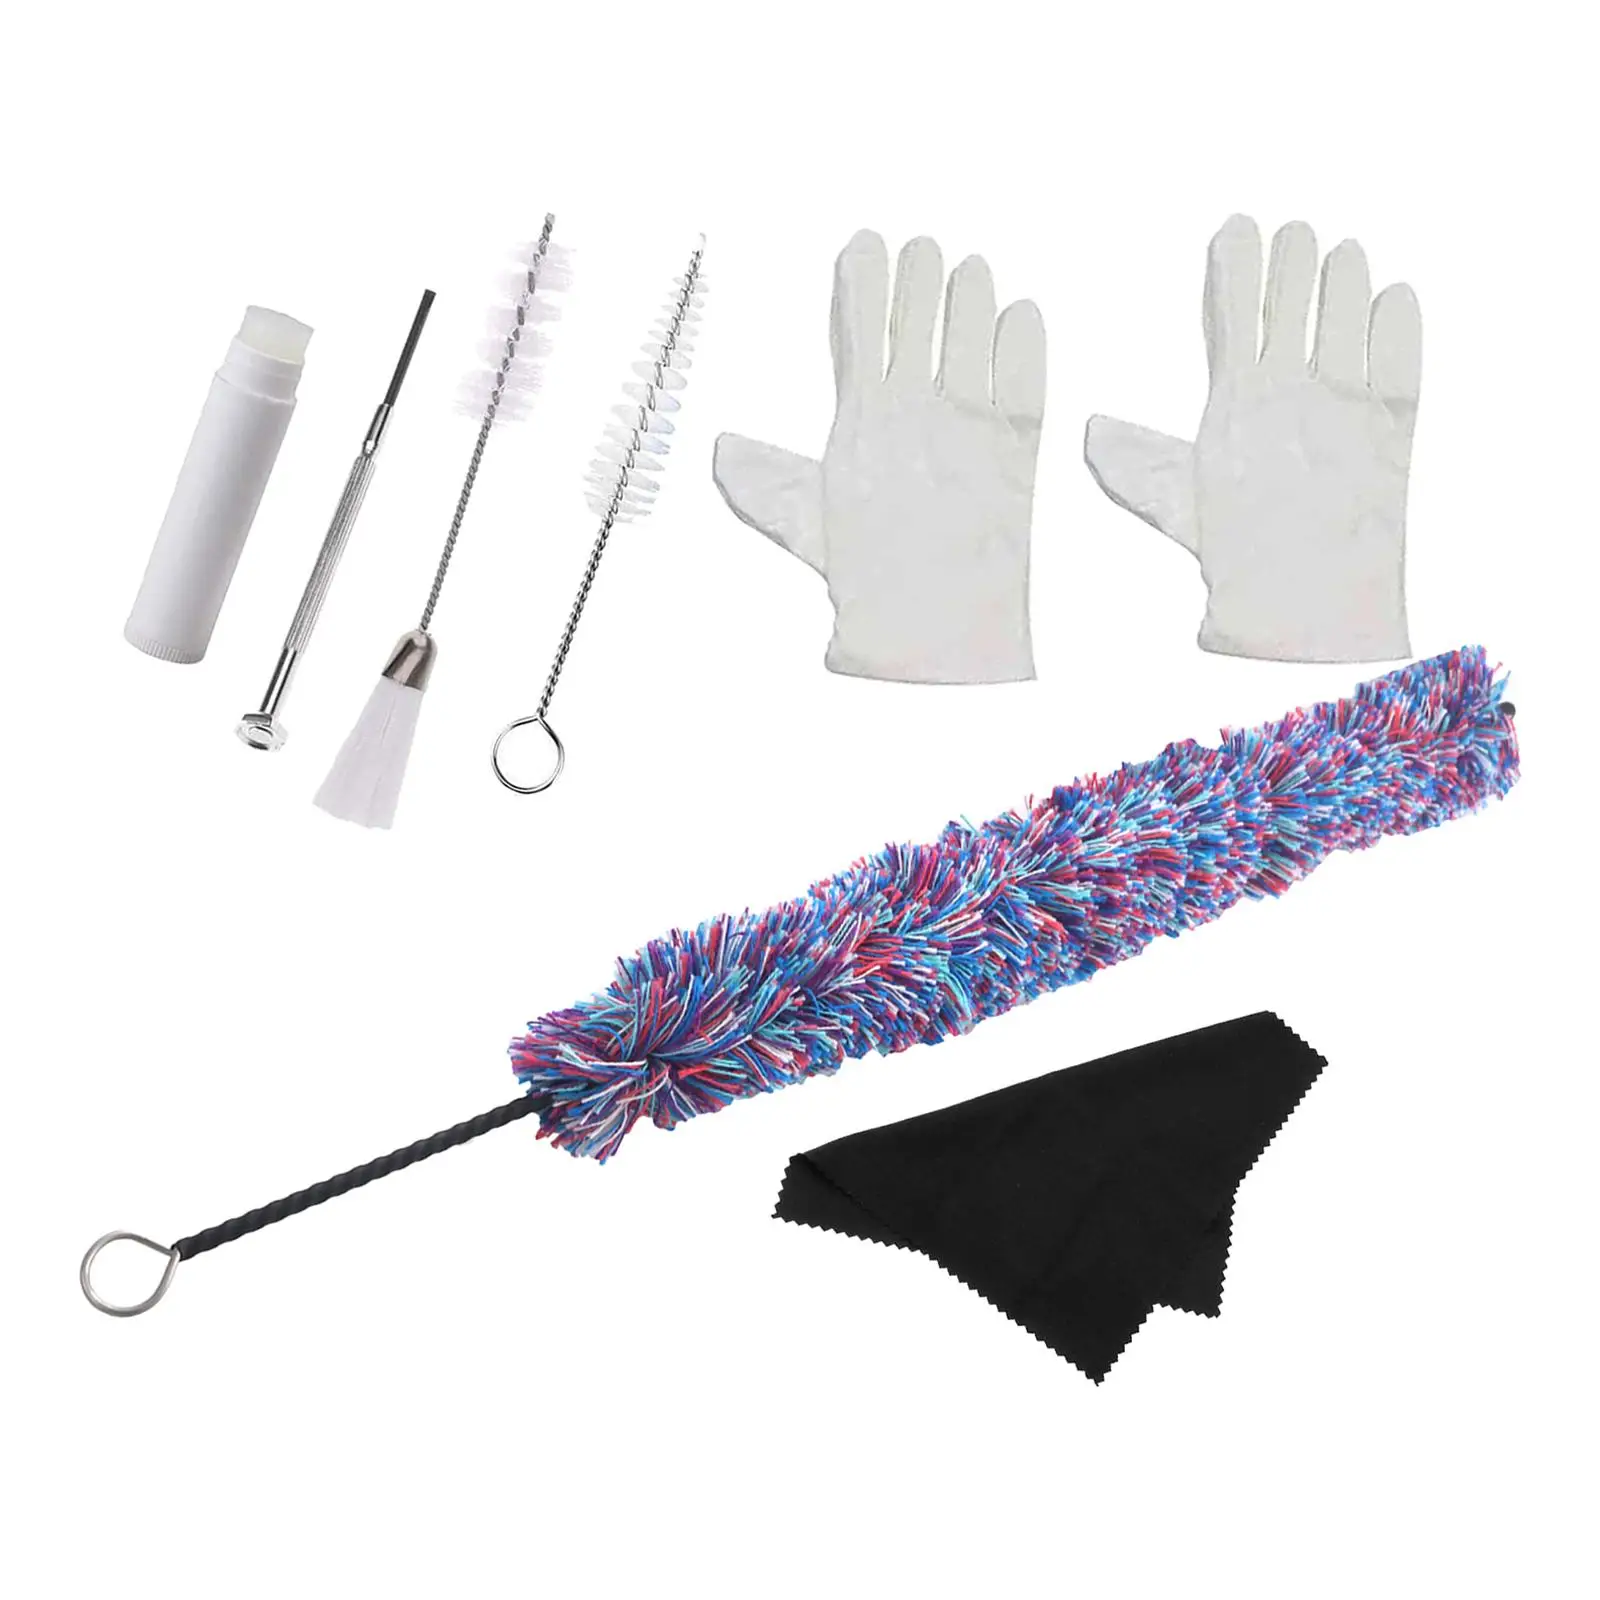  Flute Cleaner Care Cleaning Kit, Maintenance Kit, Cork ,Swab,Cleaning Cloth,Cleaning Brush,Cleaning Rod,and Gloves Set